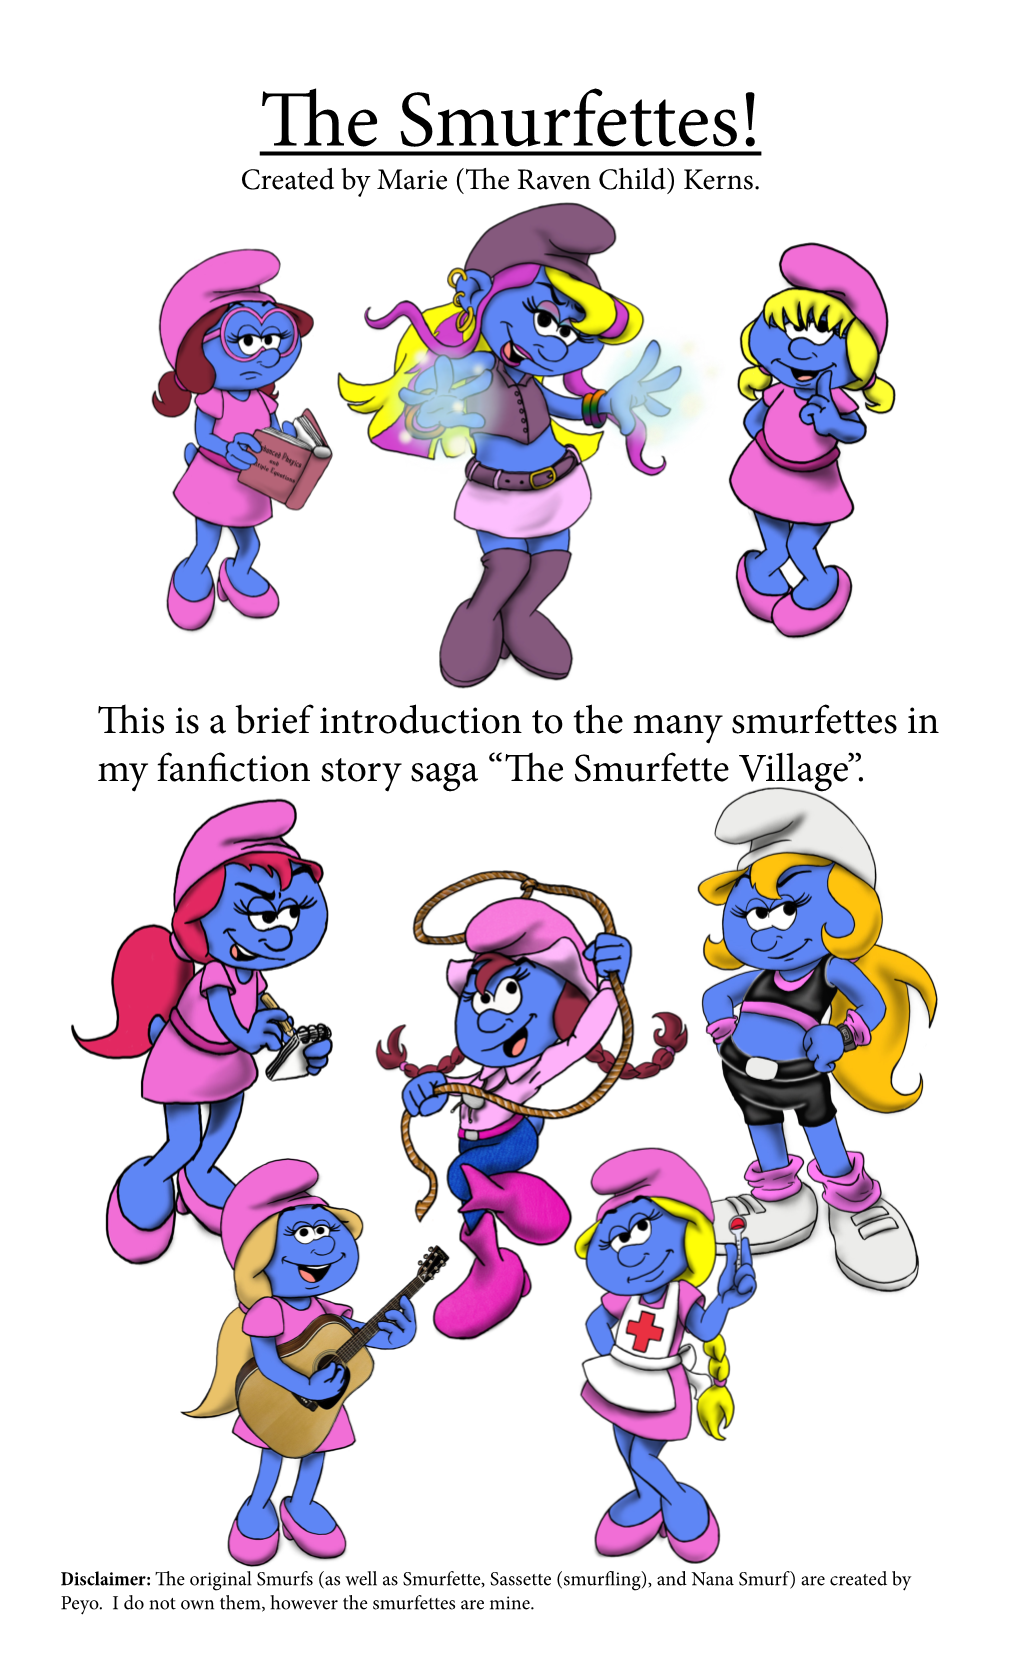 The Smurfettes! Created by Marie (The Raven Child) Kerns